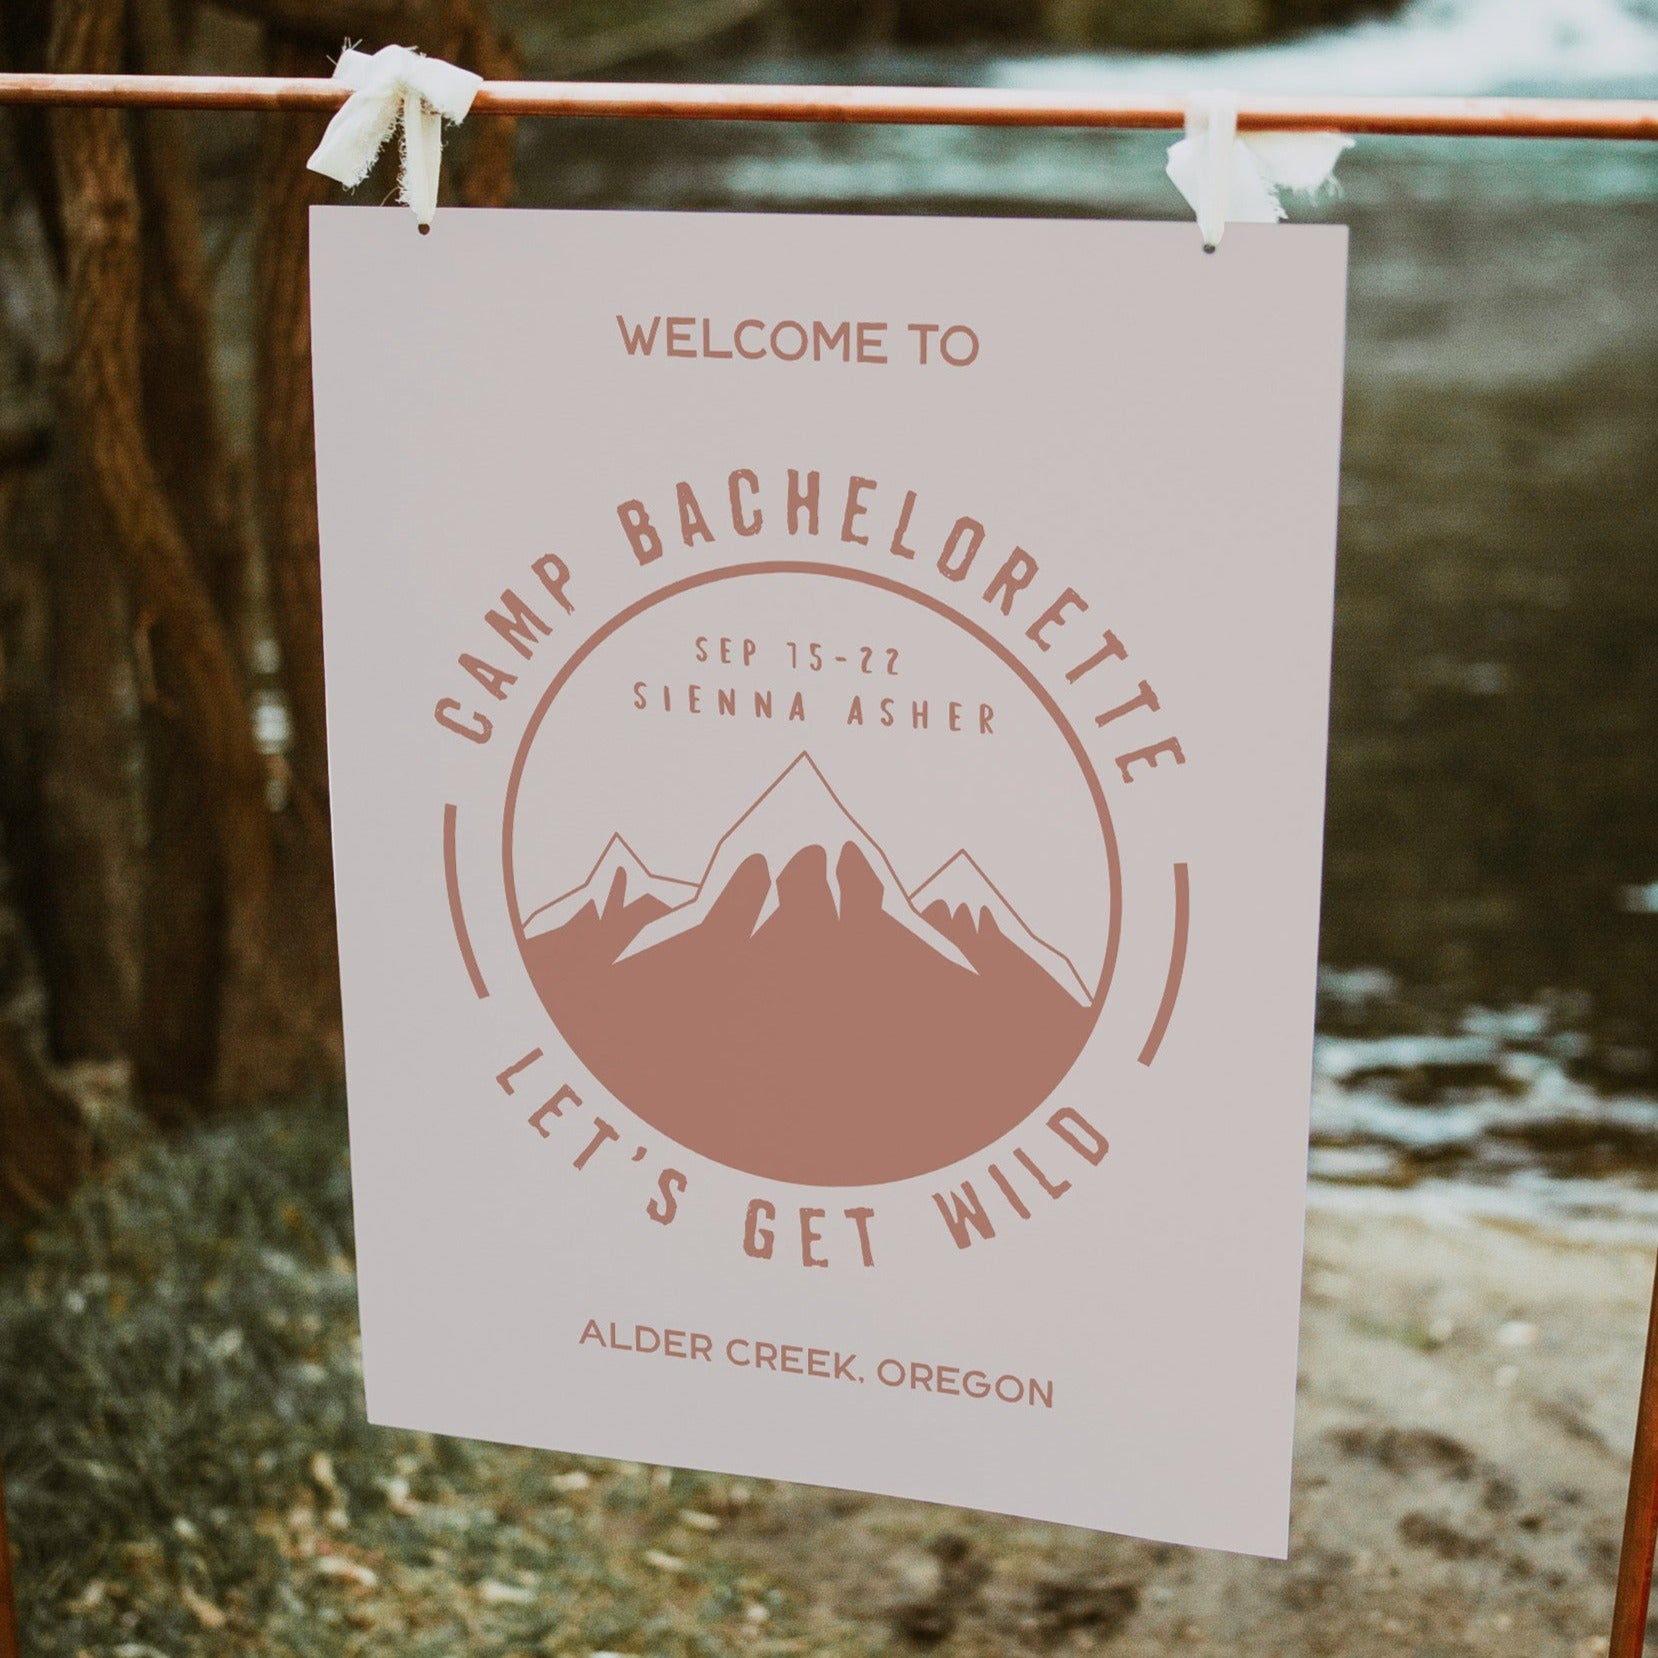 Fully editable and printable welcome signs with a pine cabin design. Perfect for a cabin adventure Bachelorette themed party